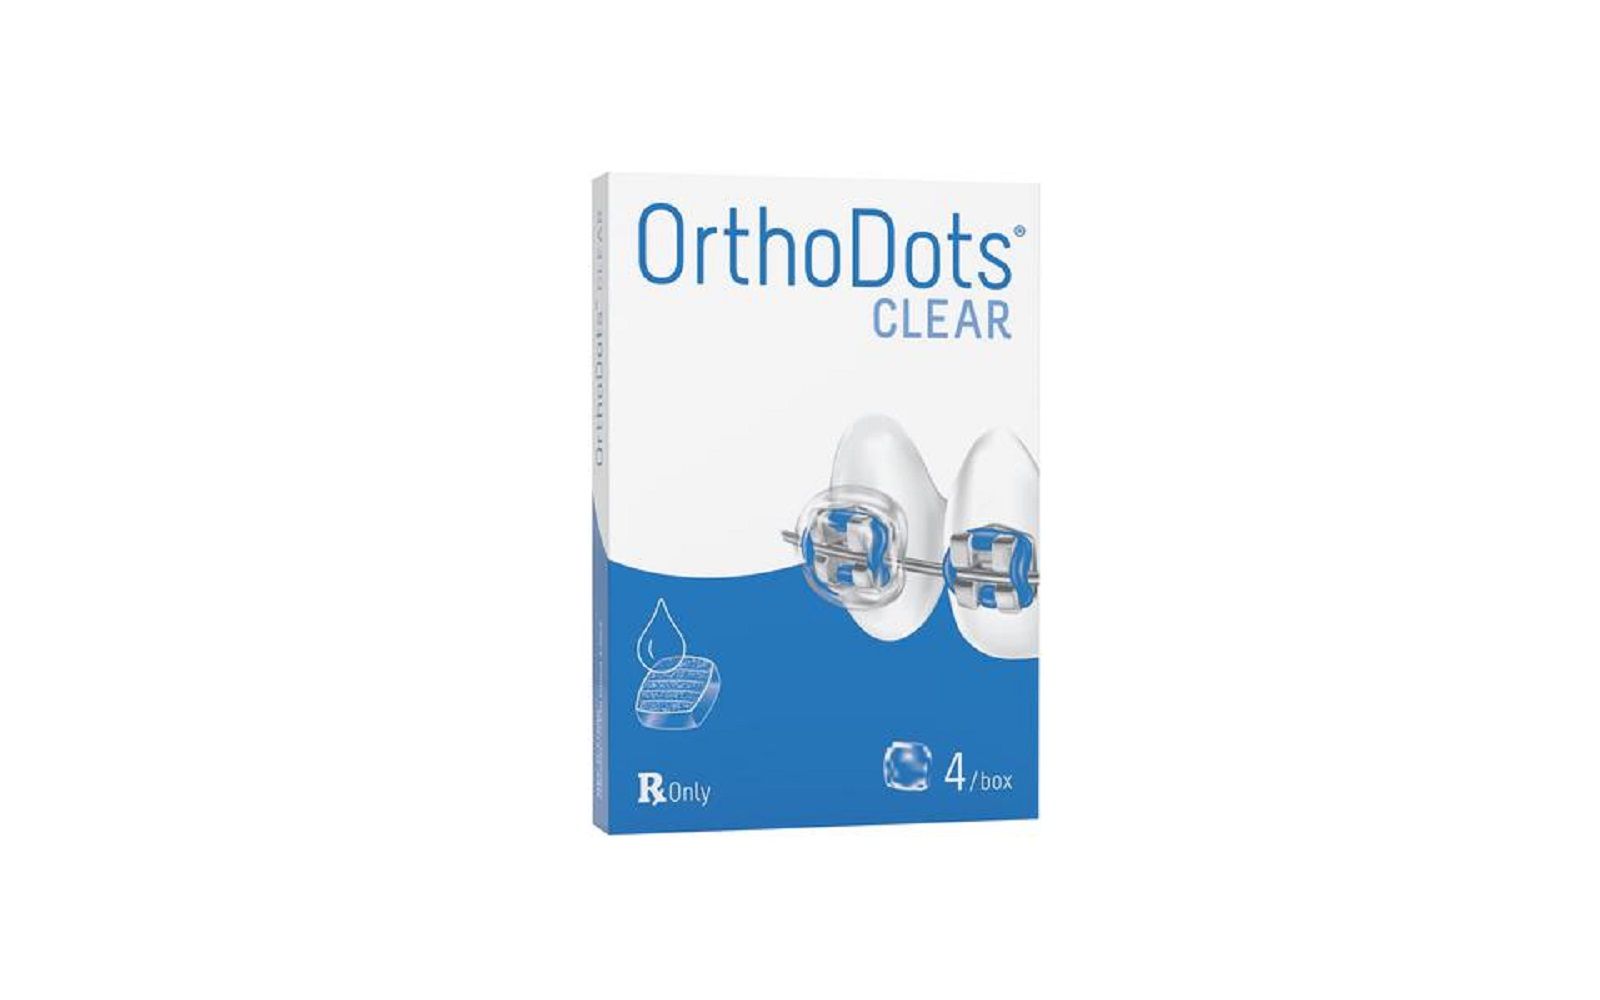 Orthodots® clear orthodontic wax professional dispensing pack - orvance llc